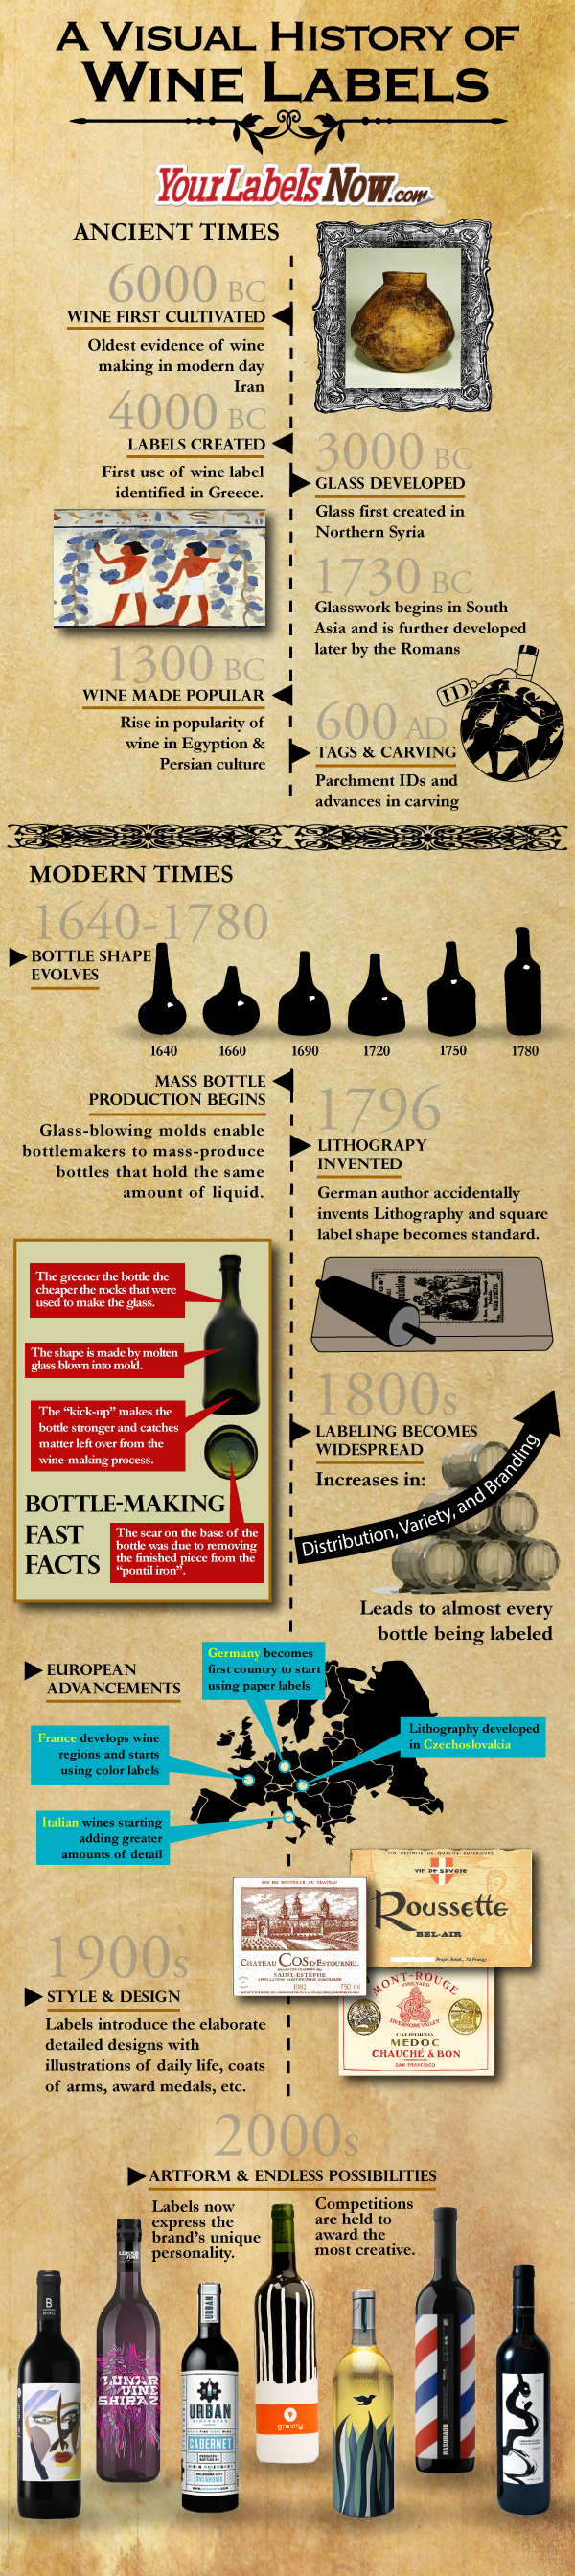 A Visual History of Wine Labels by YourLabelsNow.com